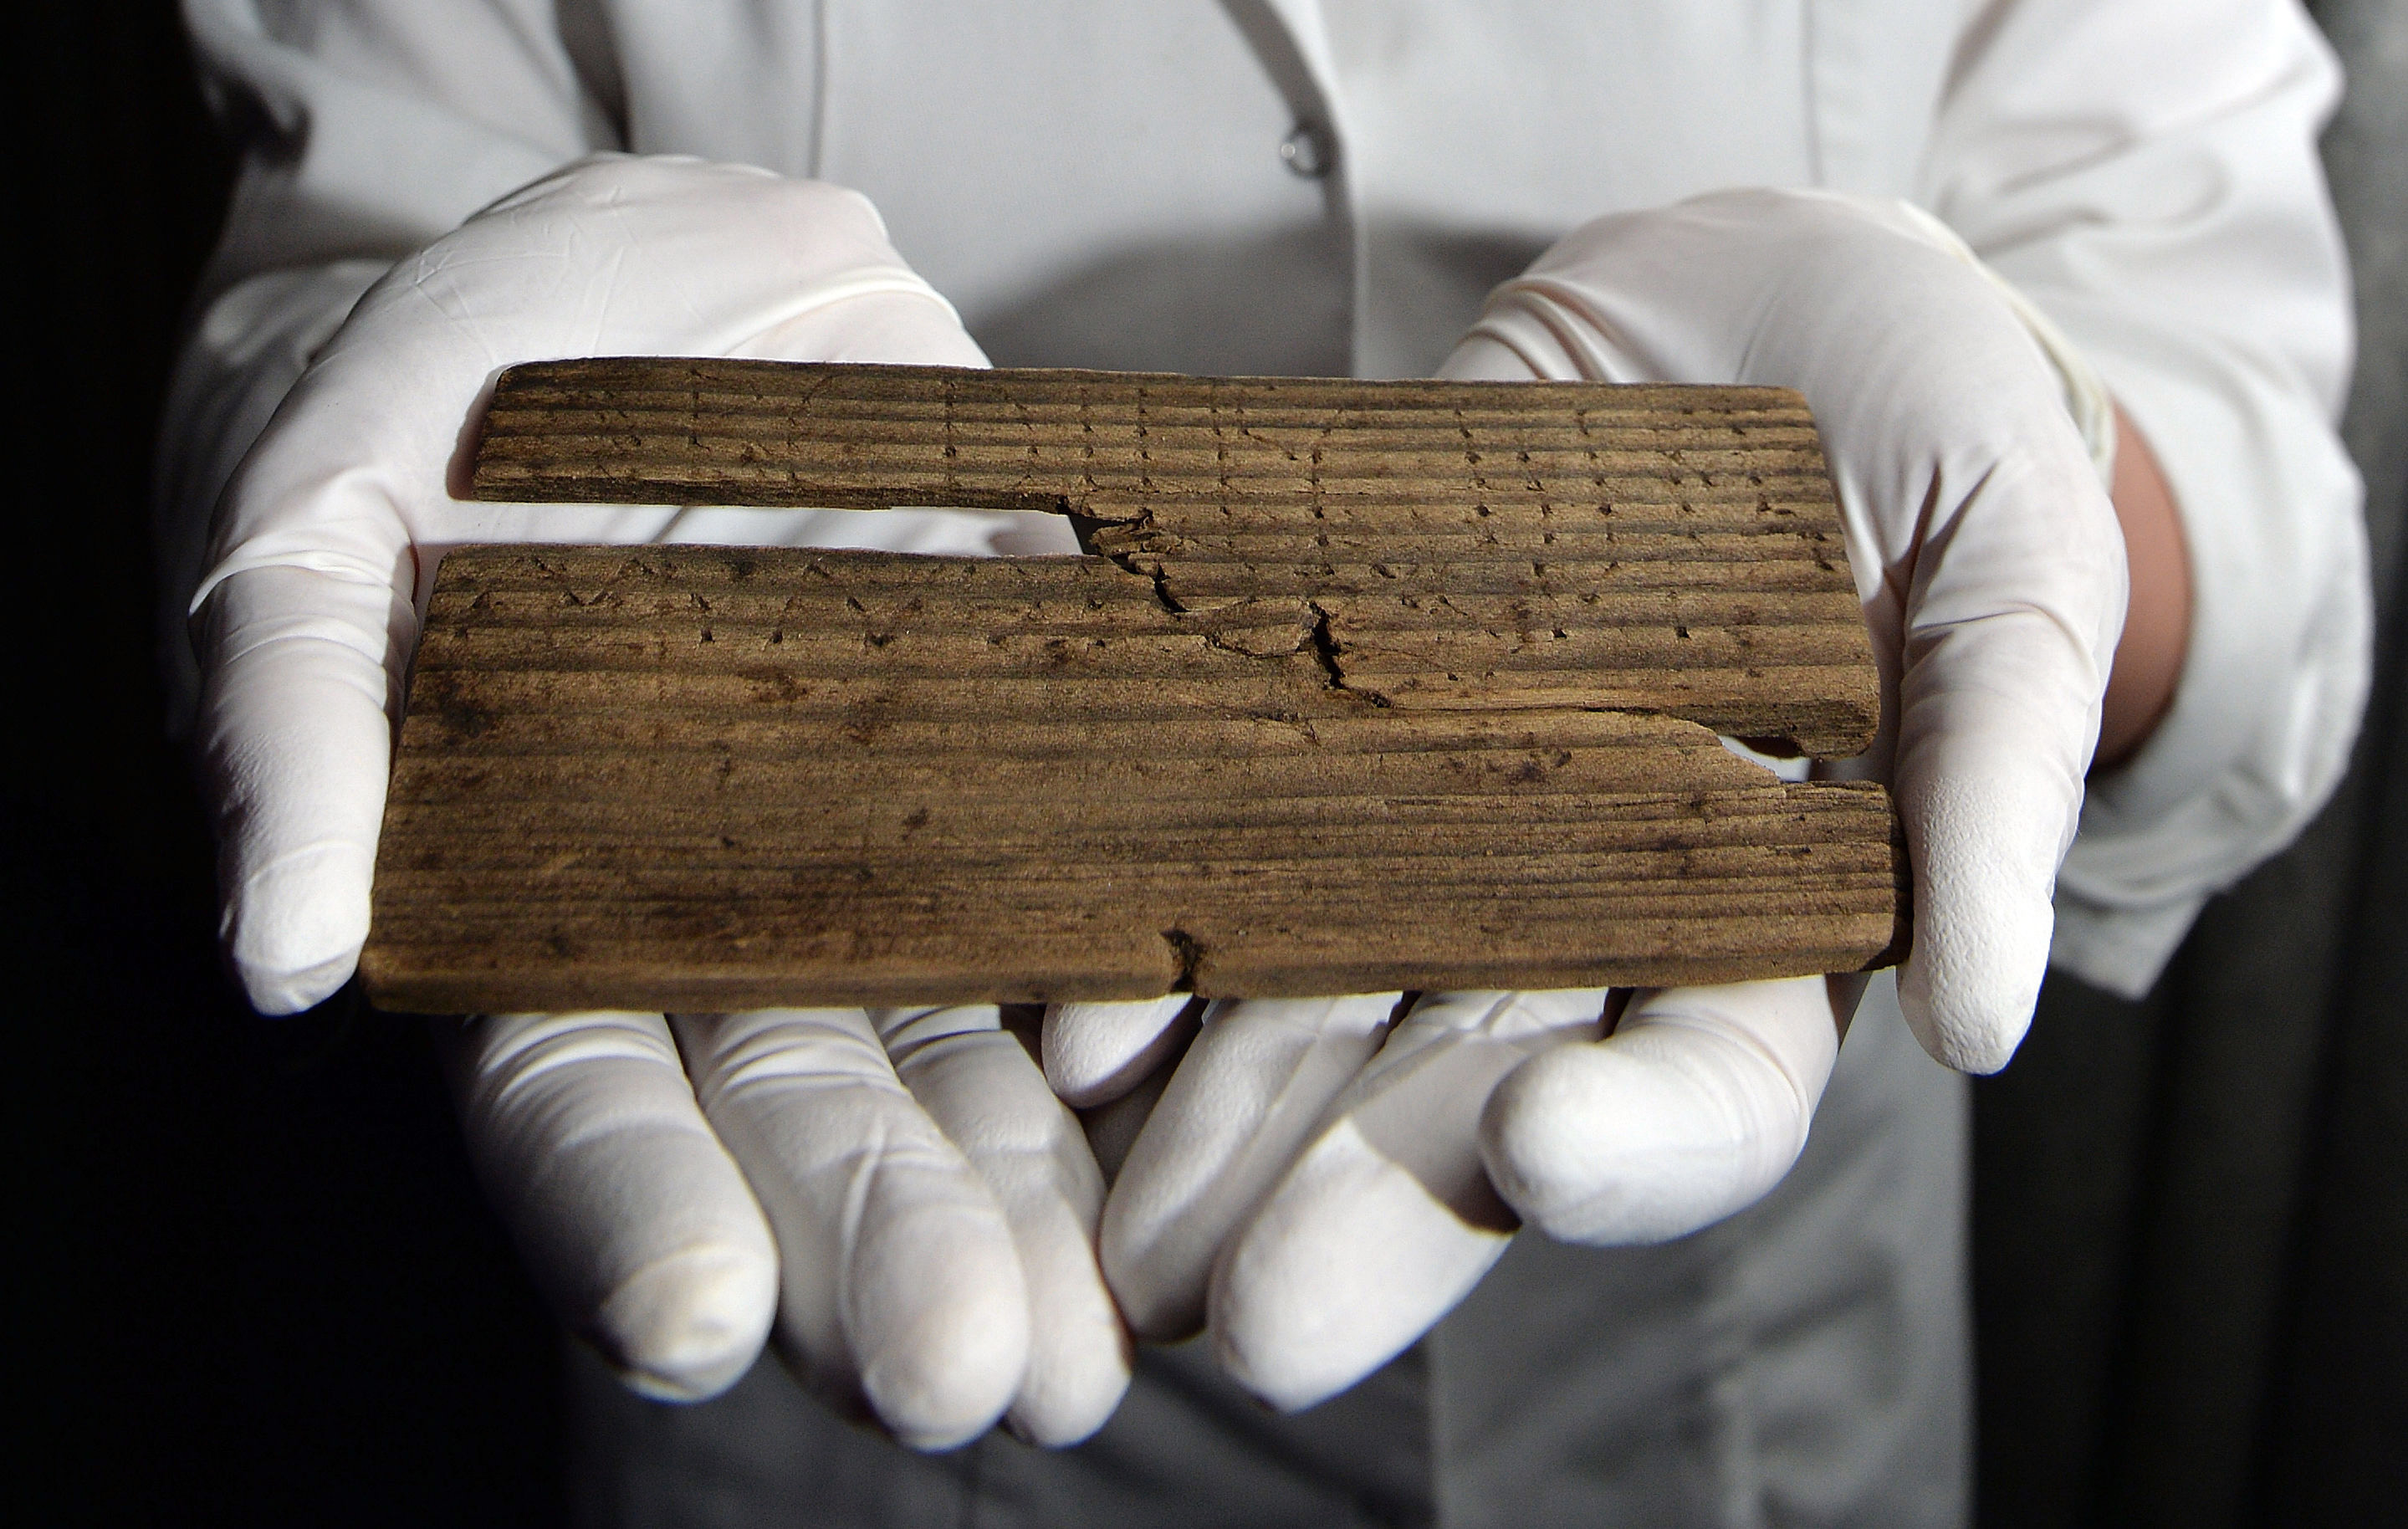 Luisa Duarte, a conservator for the Museum of London, holds a piece of wood with the Roman alphabet written on it in London on June 1, 2016 (John Stillwell&mdash;AP)